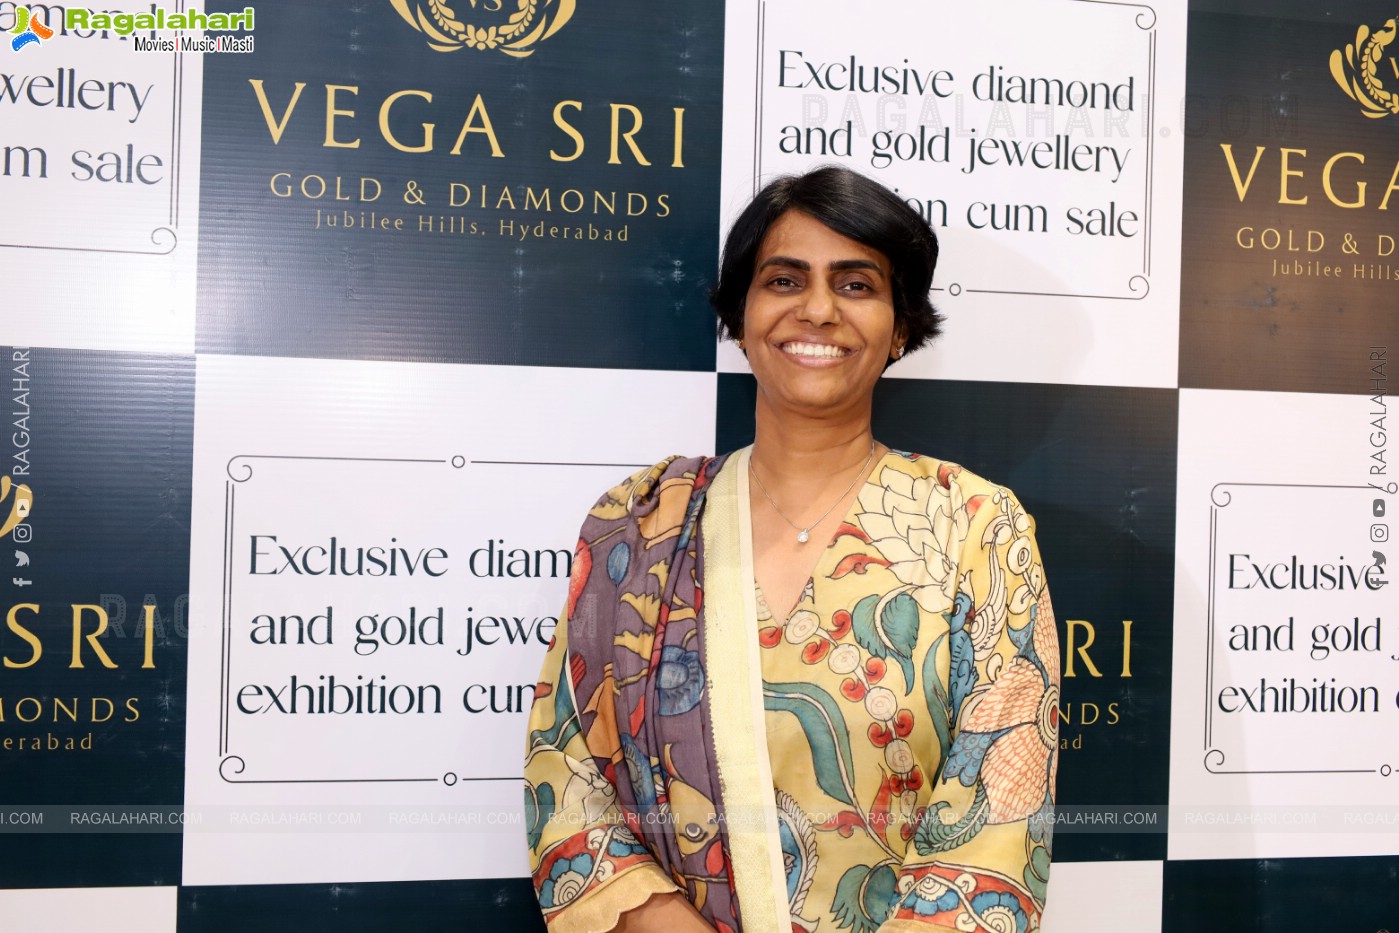 Vega Sri Gold and Diamonds Offers Exclusive Limited-Time Deal this Women's Day season!!!